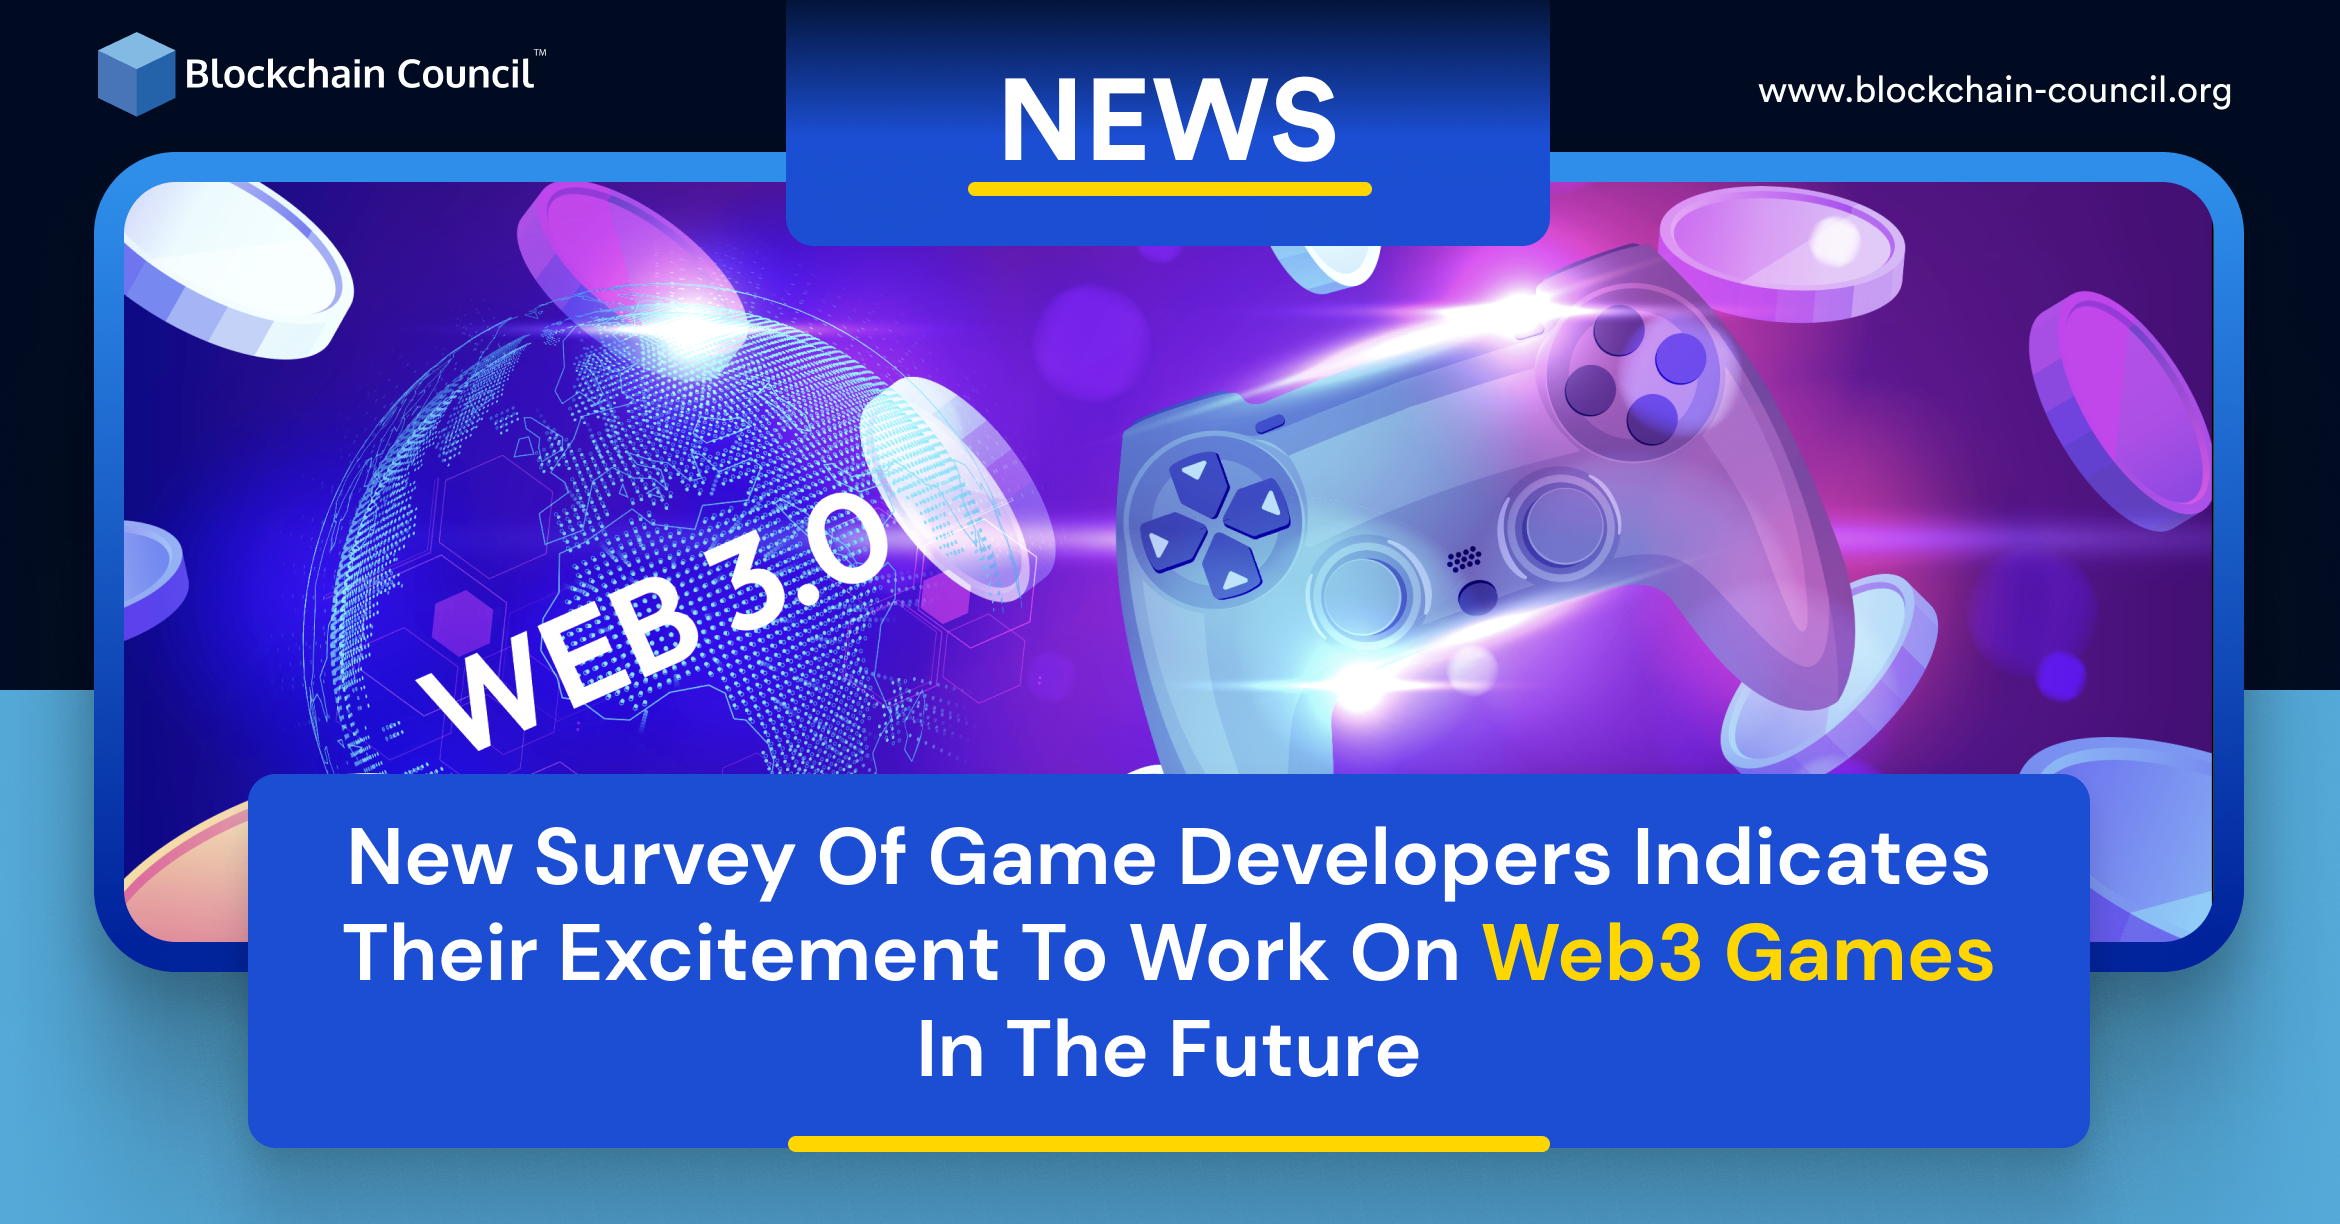 New Survey Of Game Developers Indicates Their Excitement To Work On Web3 Games In The Future